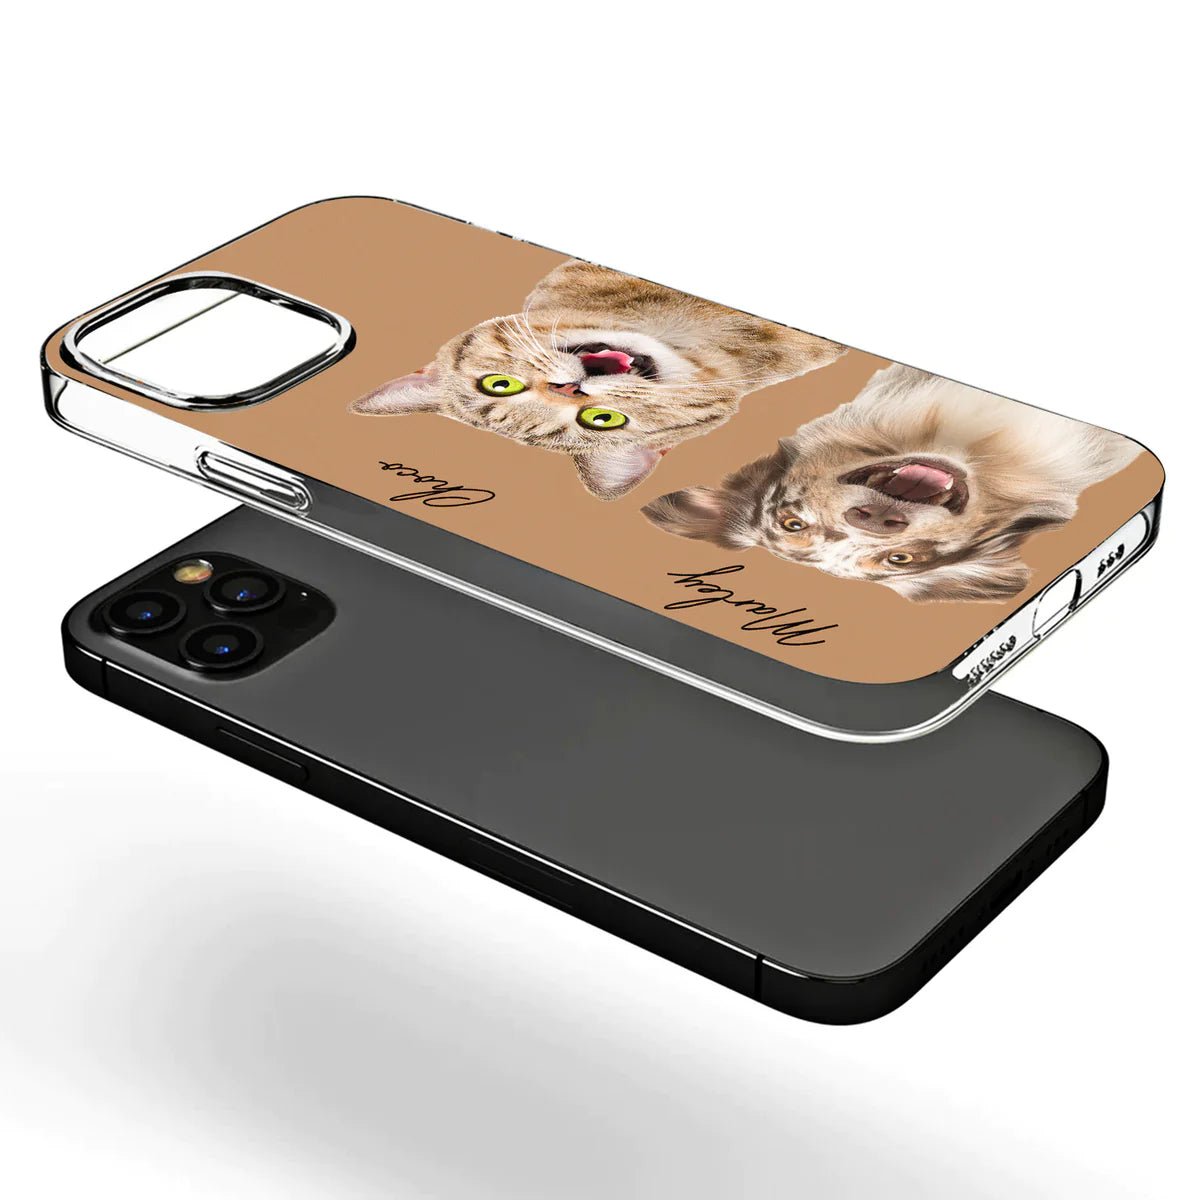 Pet Lovers - Custom Photo Your Dogs Cats - Personalized Clear Phone Case - The Next Custom Gift